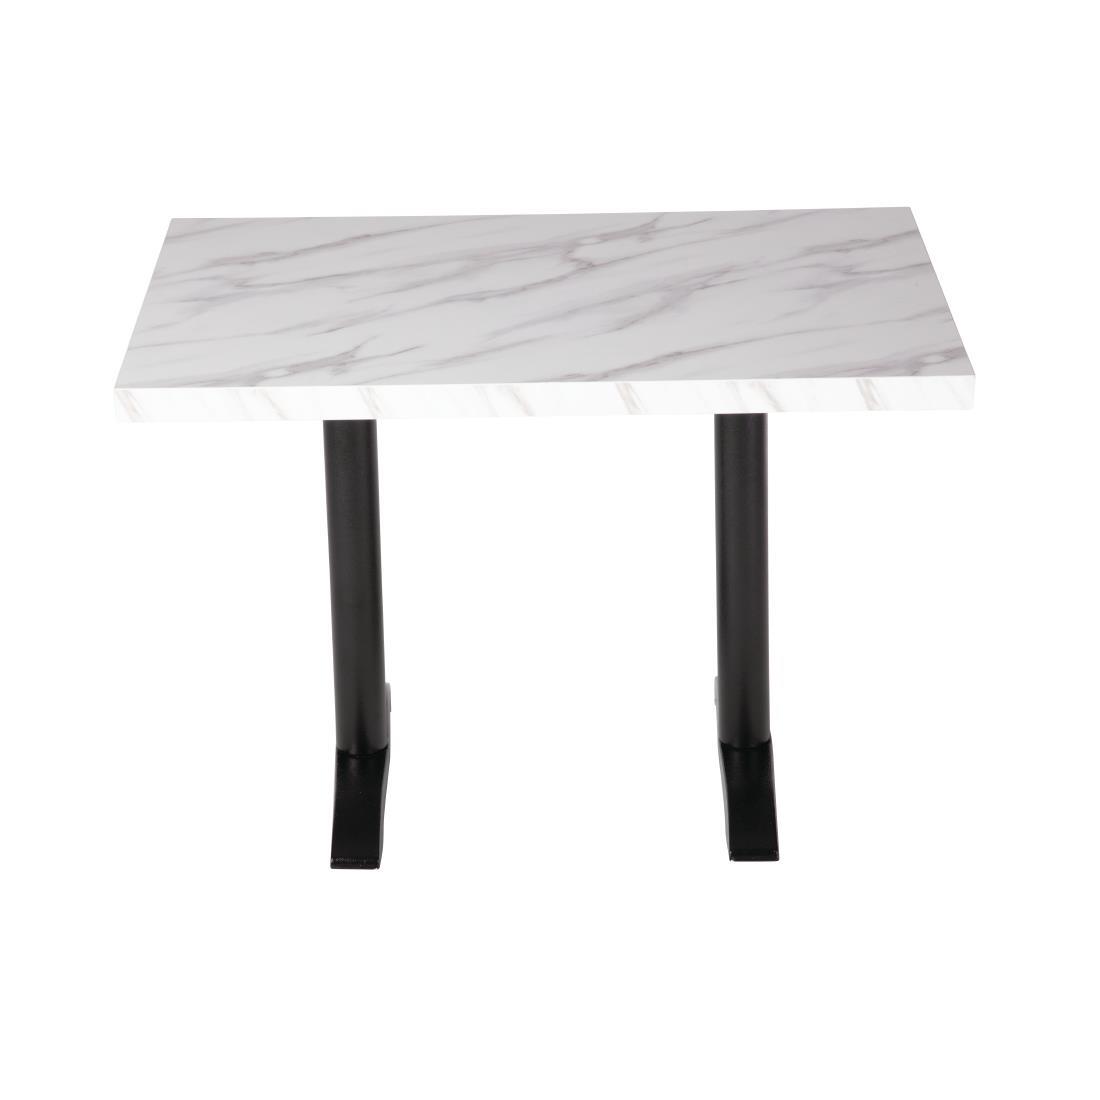 Bolero Pre-Drilled Rectangular Table Top Marble Effect 700mm - DT447  - 5